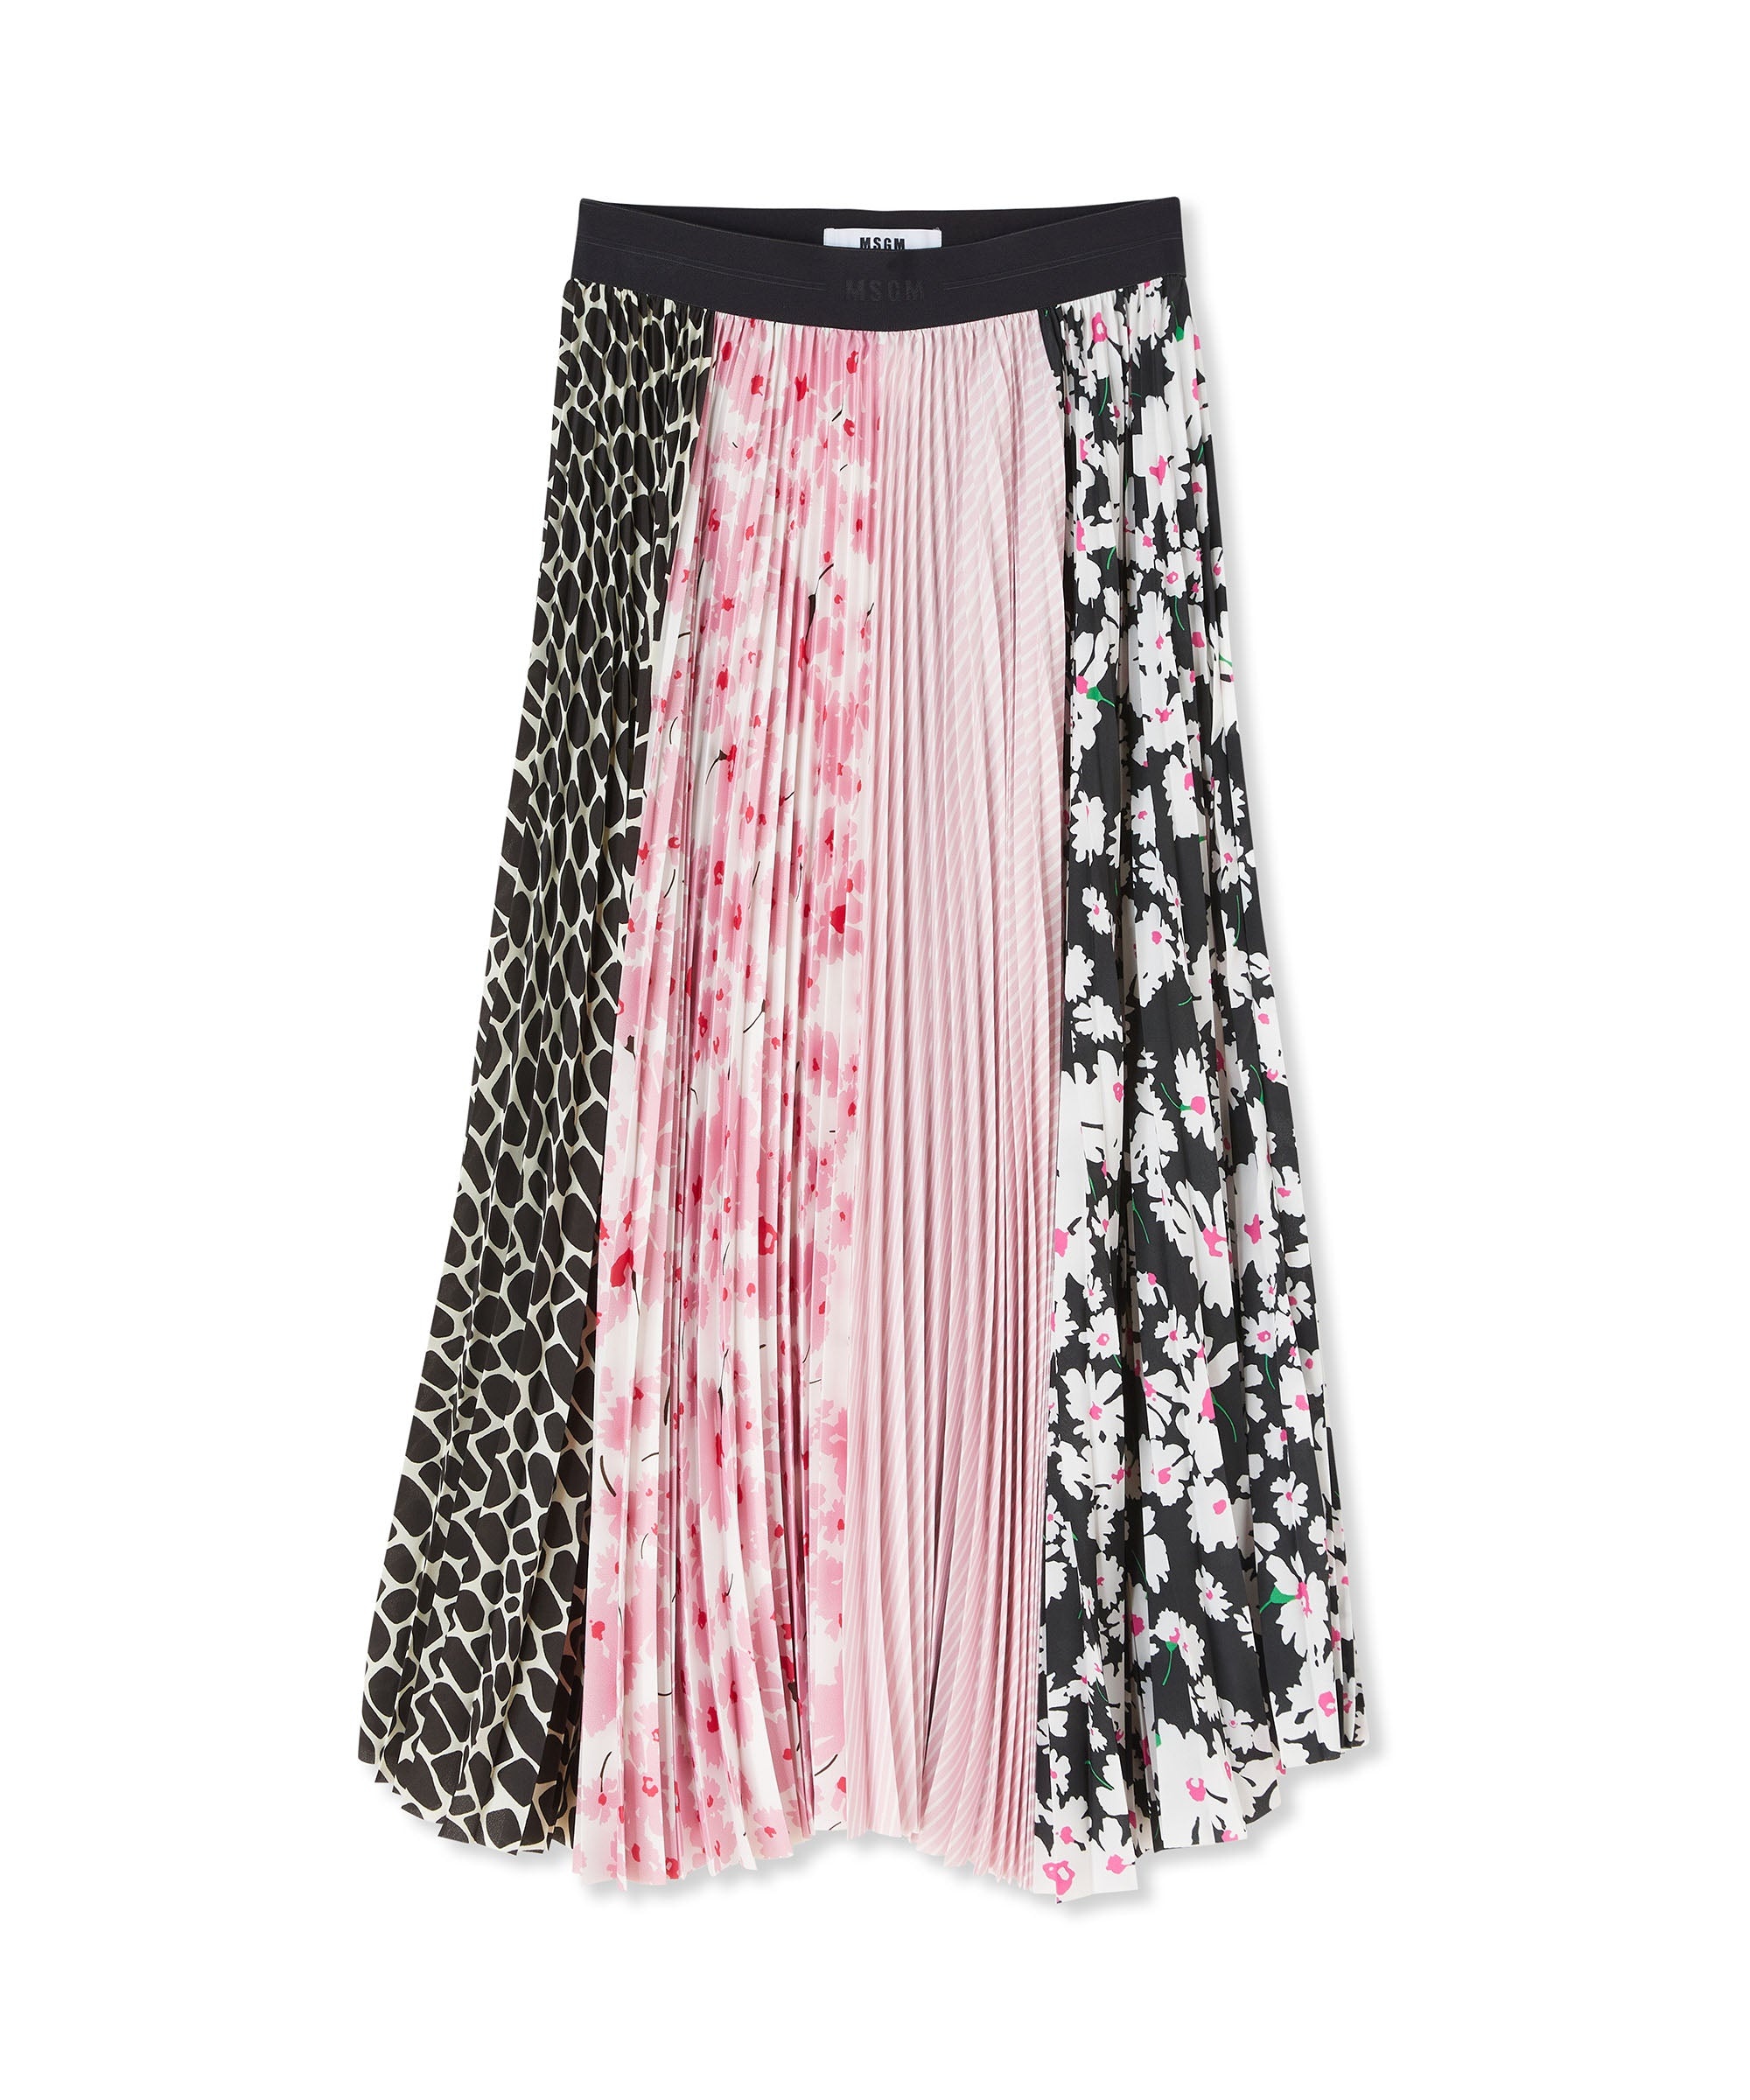 Long pleated skirt with patchwork print and elasticized waistband - 1